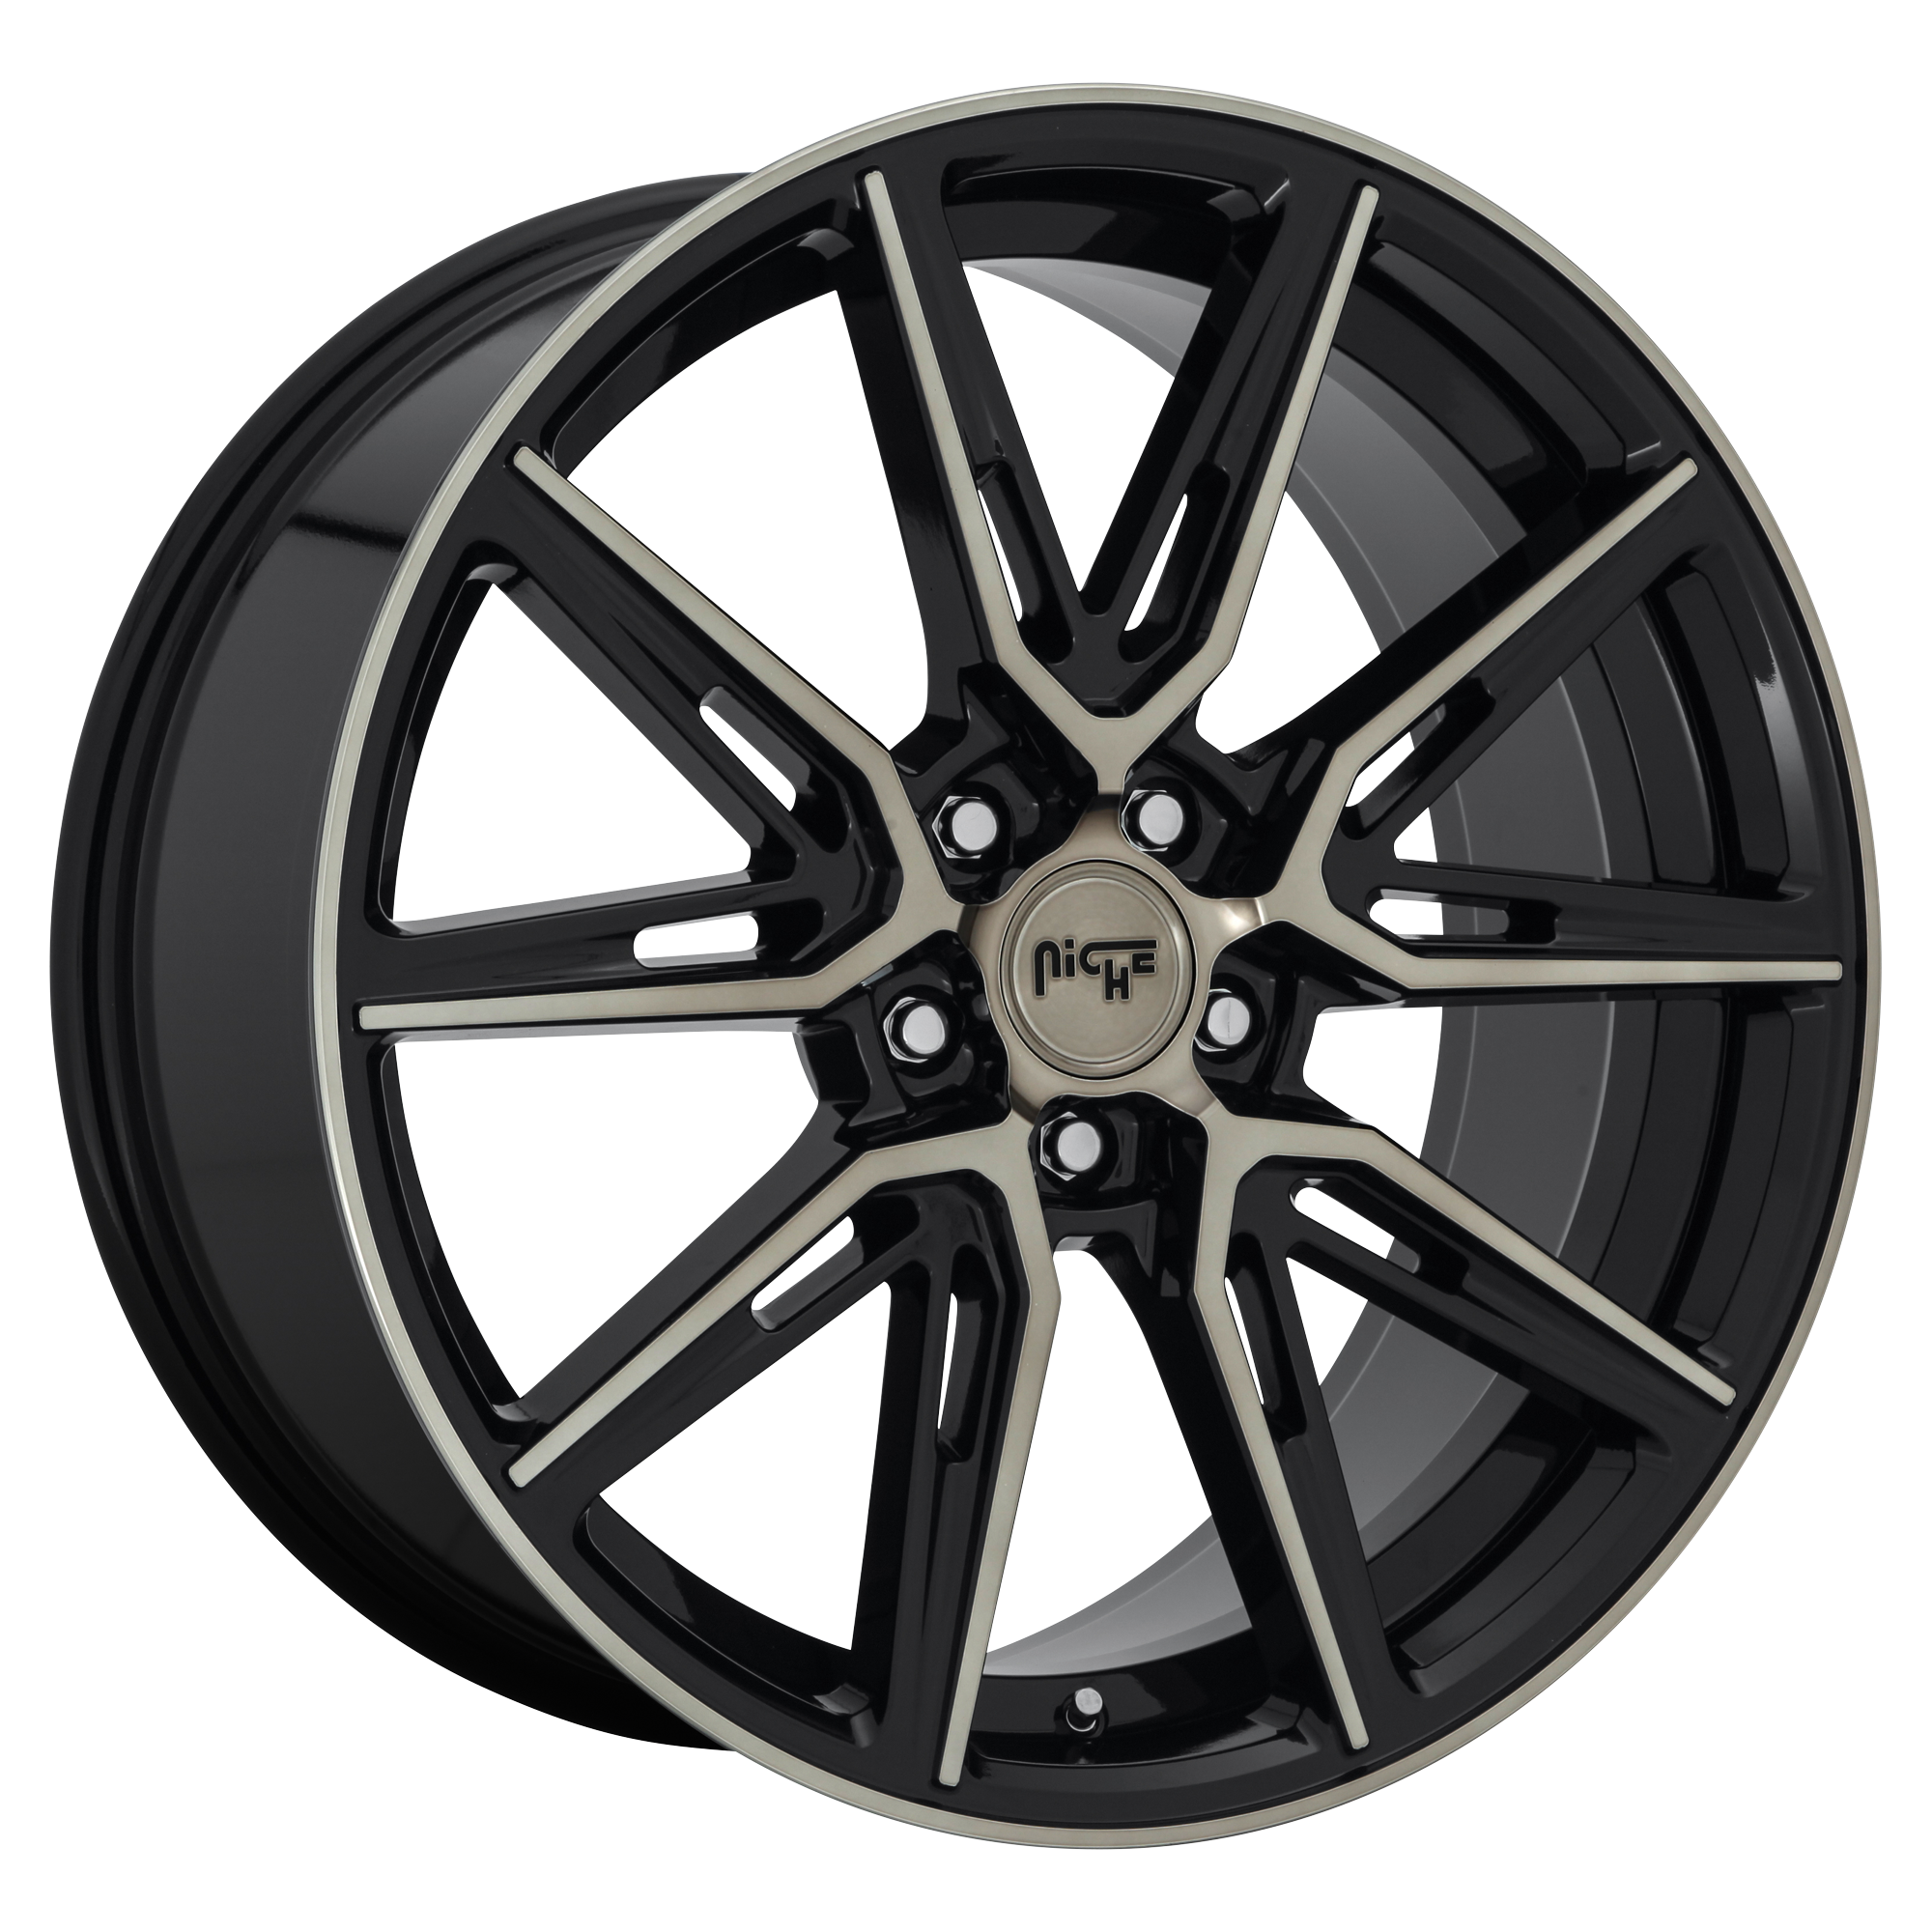 GEMELLO 20x9 5x115.00 GLOSS MACHINED DOUBLE DARK TINT (18 mm) - Tires and Engine Performance